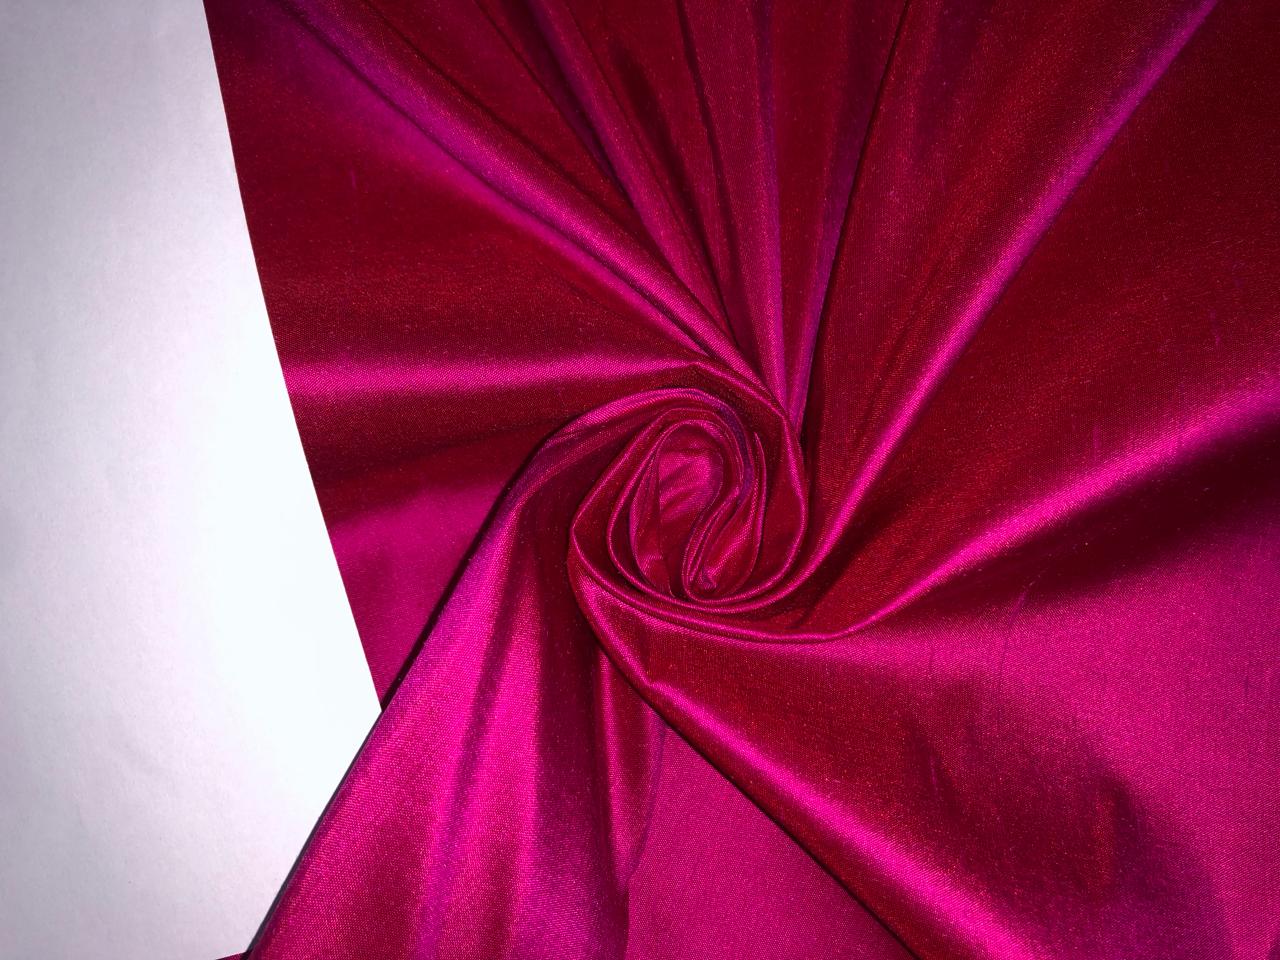 100% pure silk dupioni fabric Hot pink color 54" wide DUP399[1]